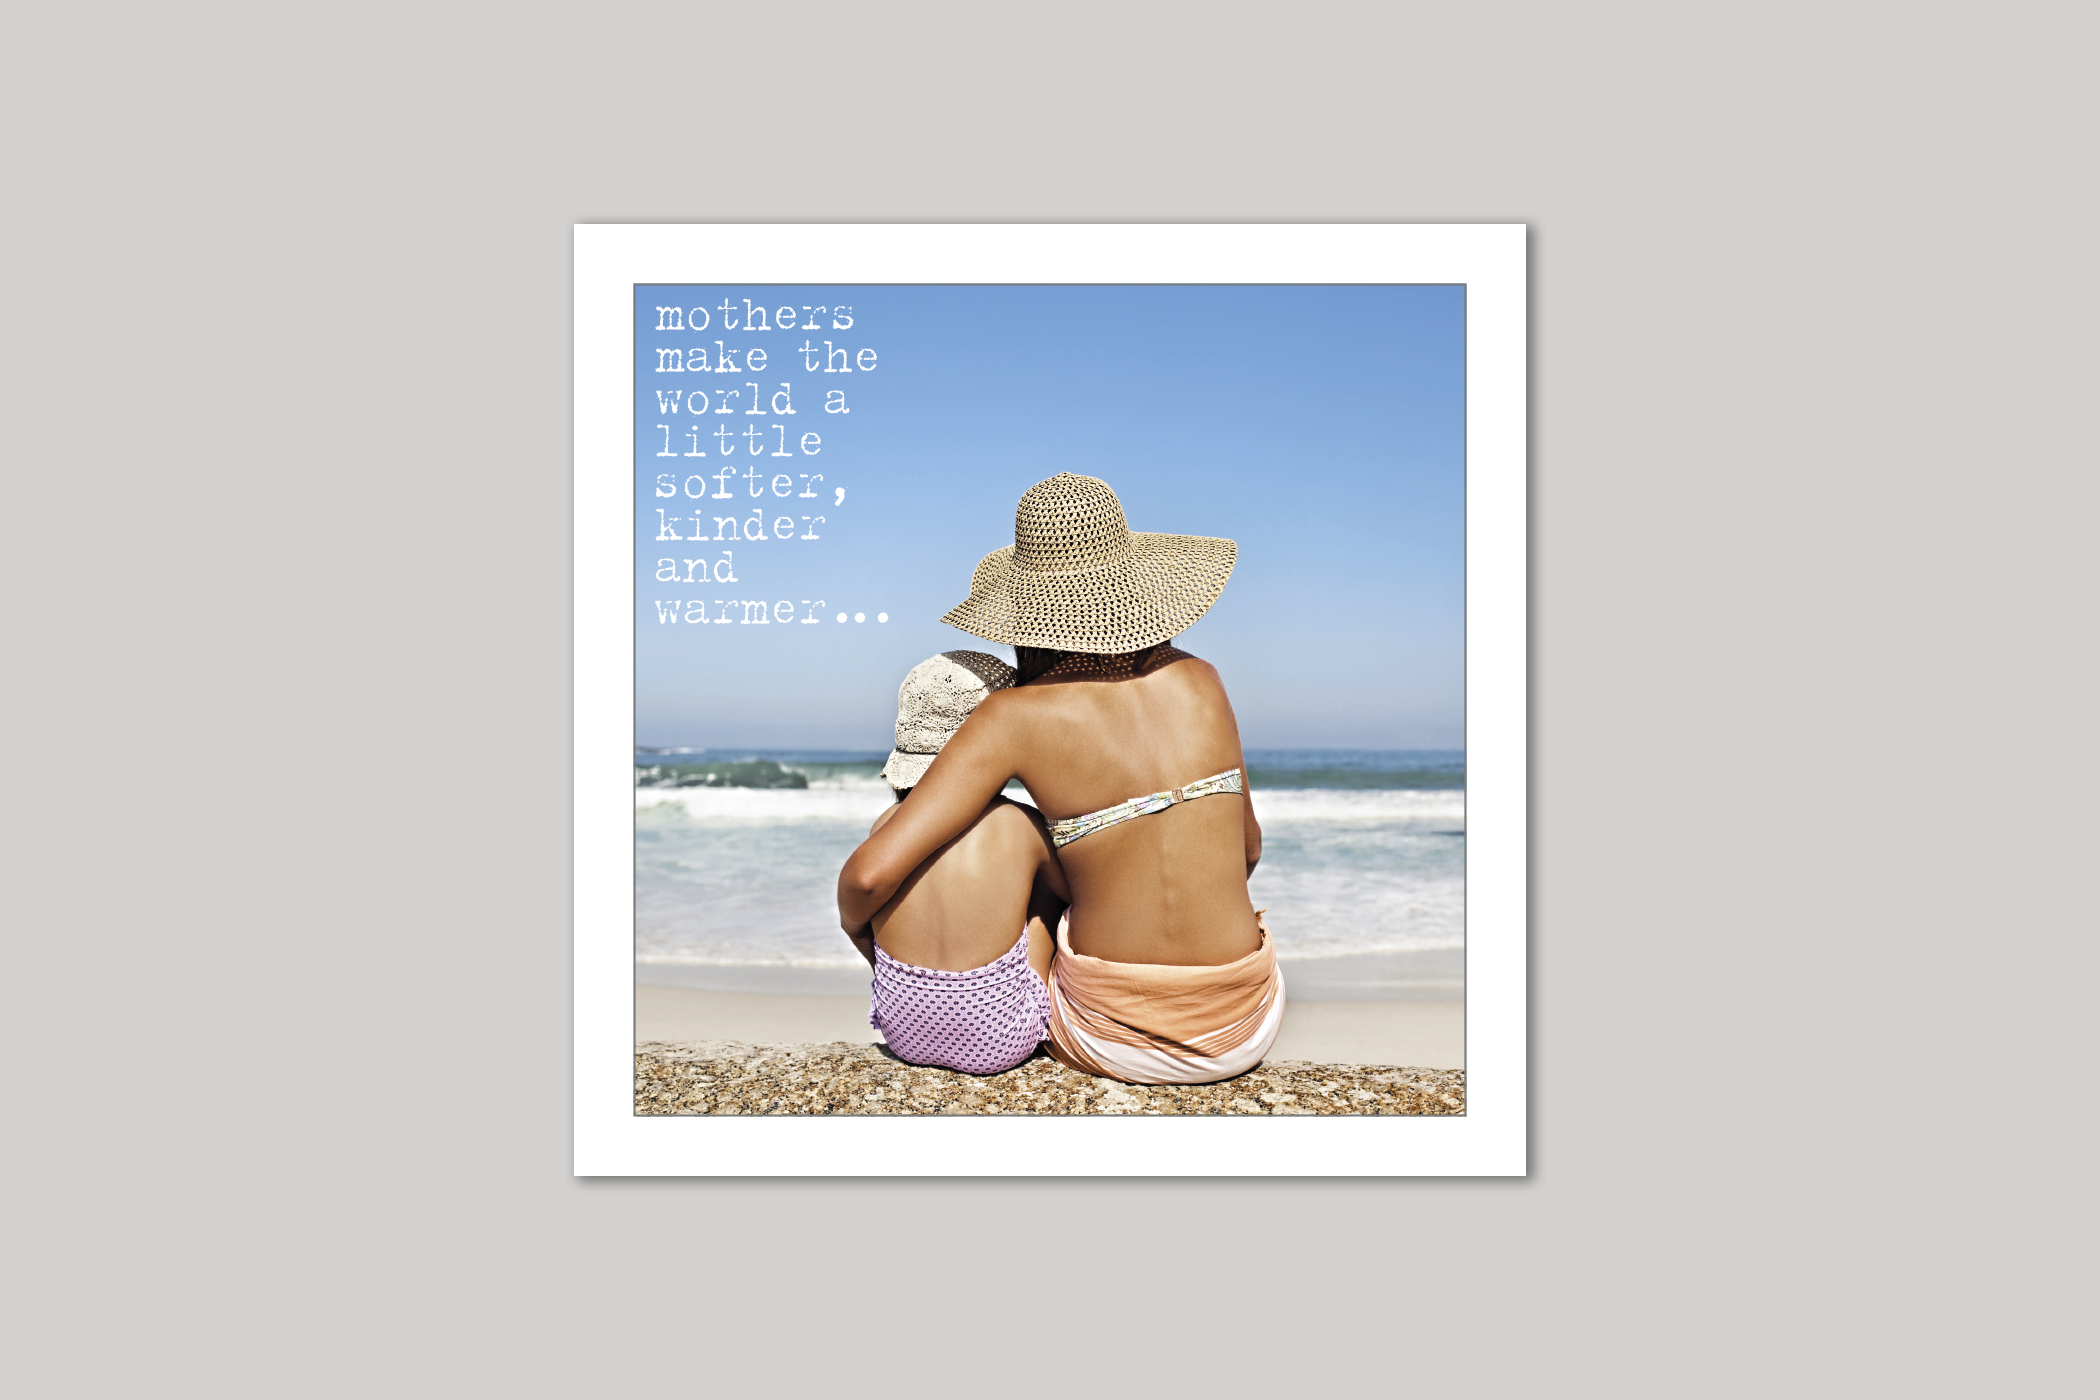 Softer. Kinder. Warmer mum card from Life Is Sweet range of greeting cards by Icon.